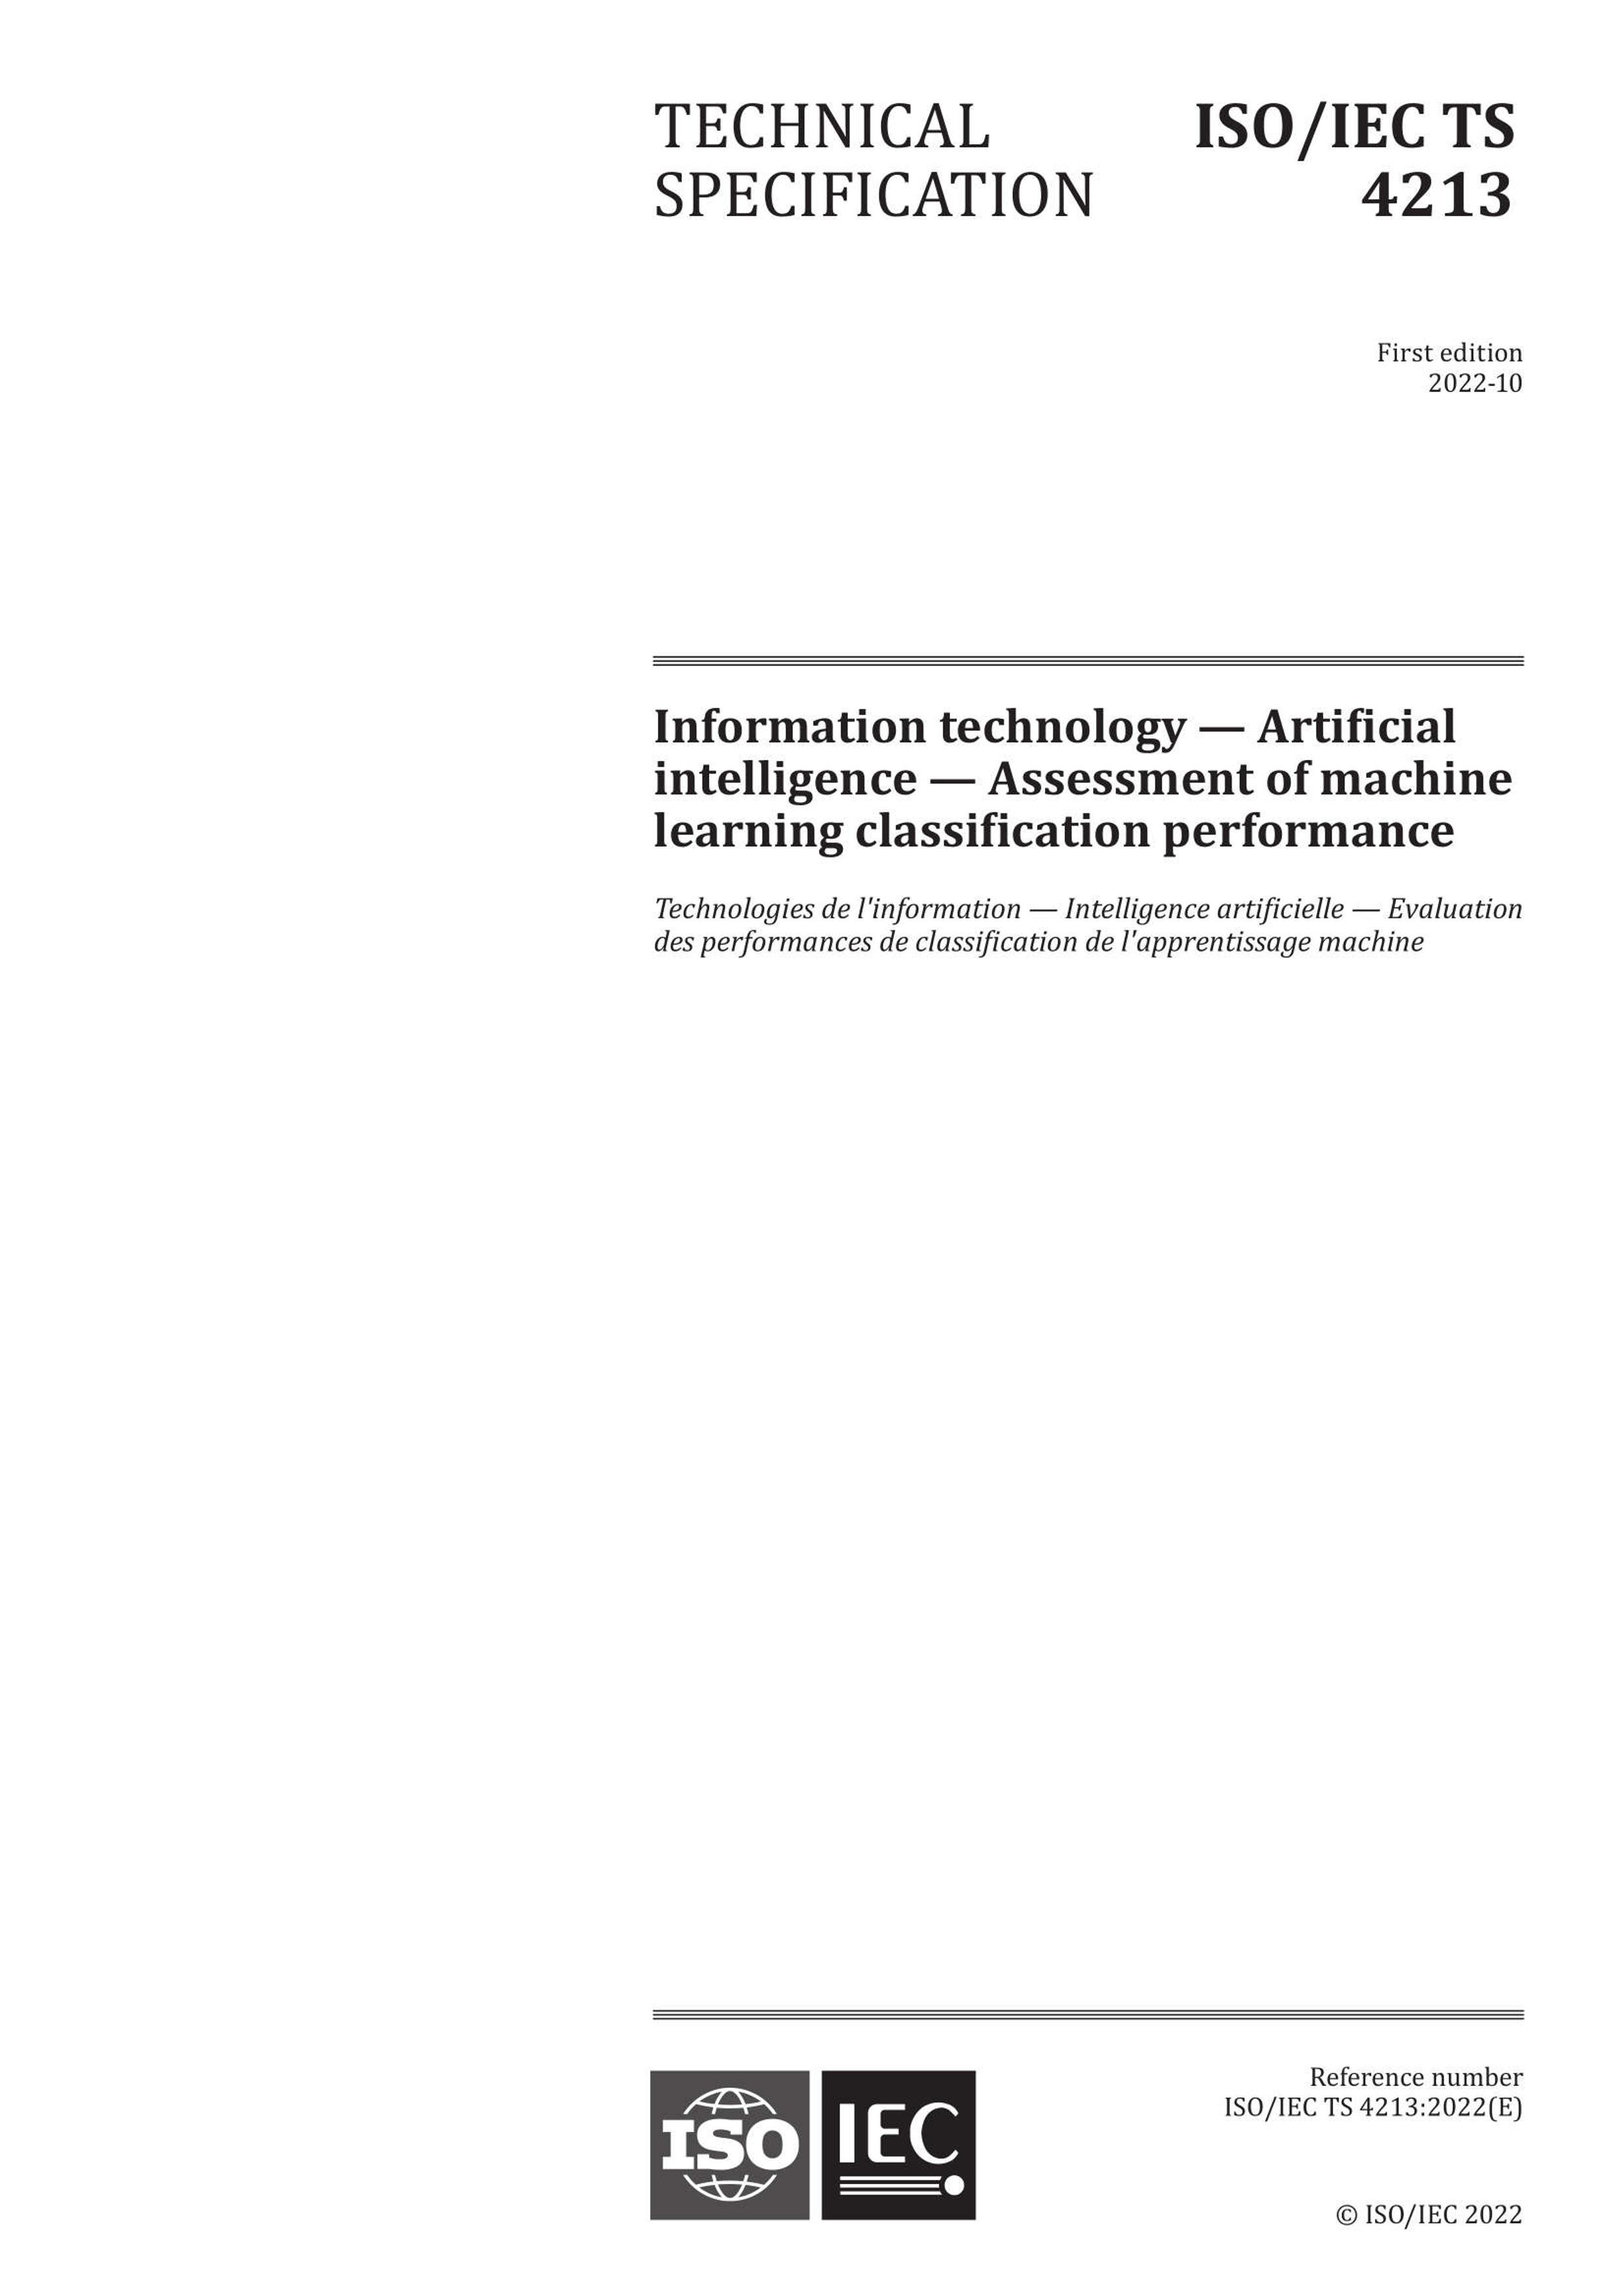 ISOMIEC TS 4213- 2022 Information technology  Artificial intelligence  Assessment of machine learning classification performance.pdf1ҳ